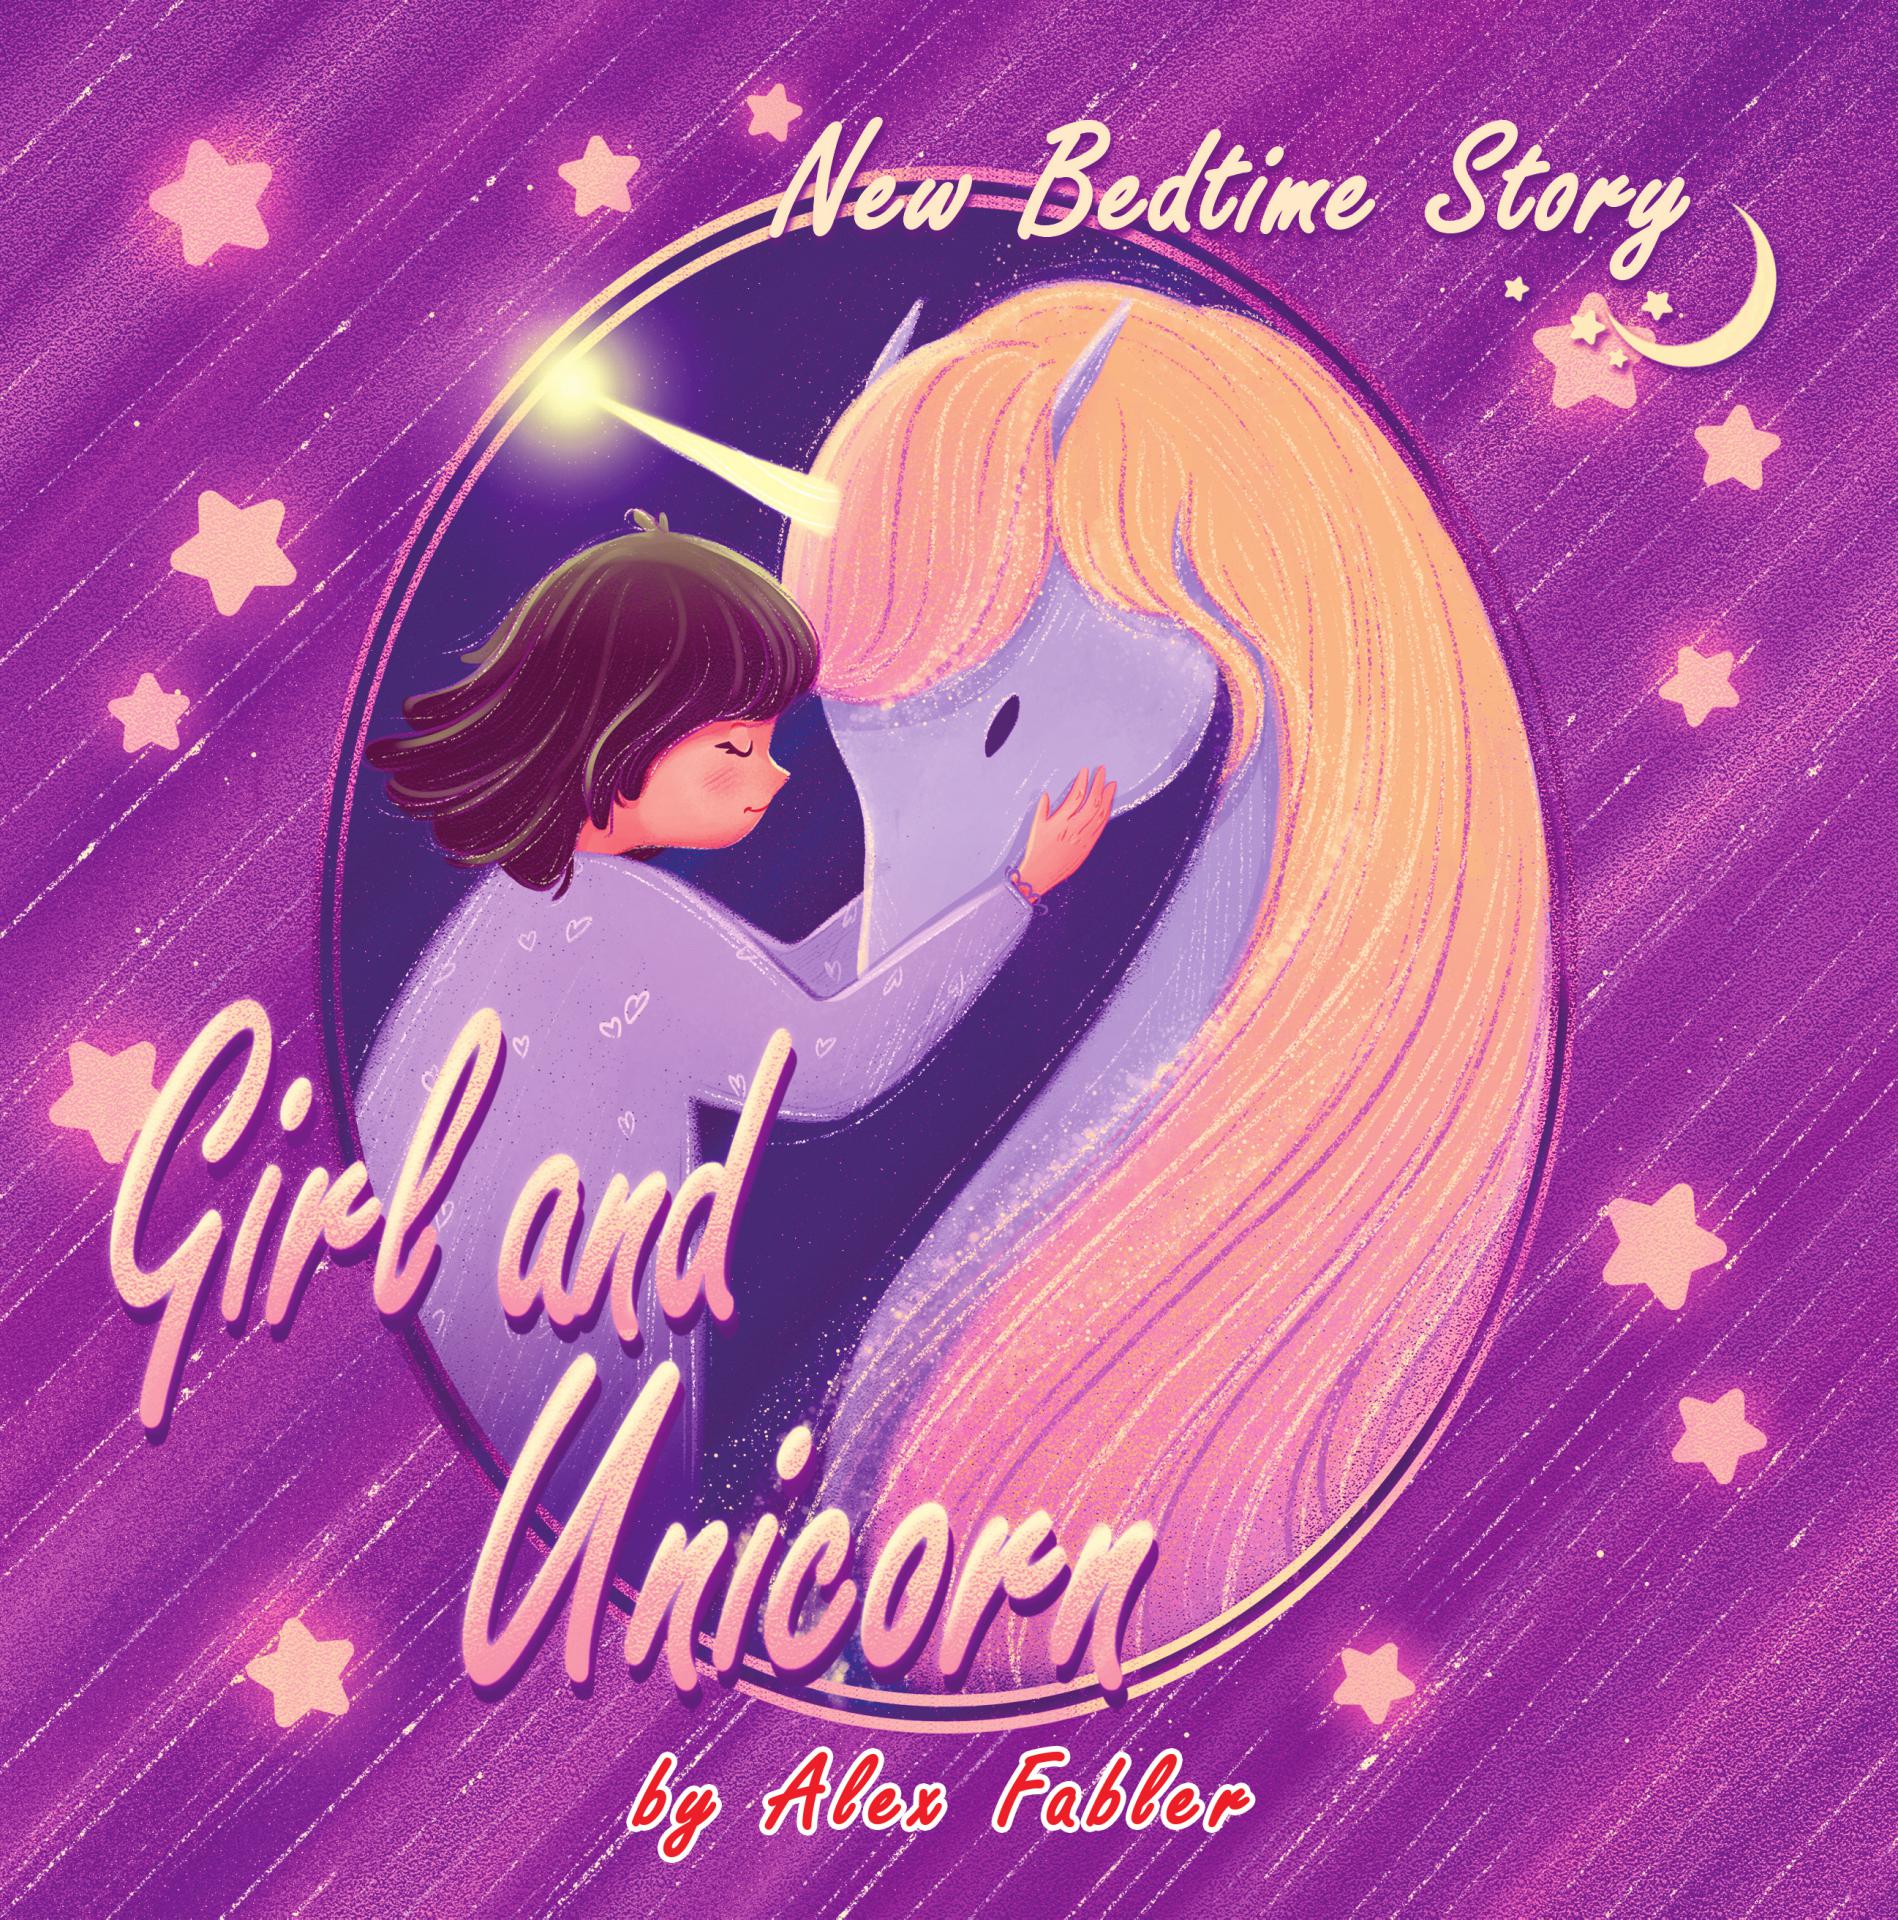 FREE: Girl and Unicorn – New Bedtime Story by Girl and Unicorn – New Bedtime Story